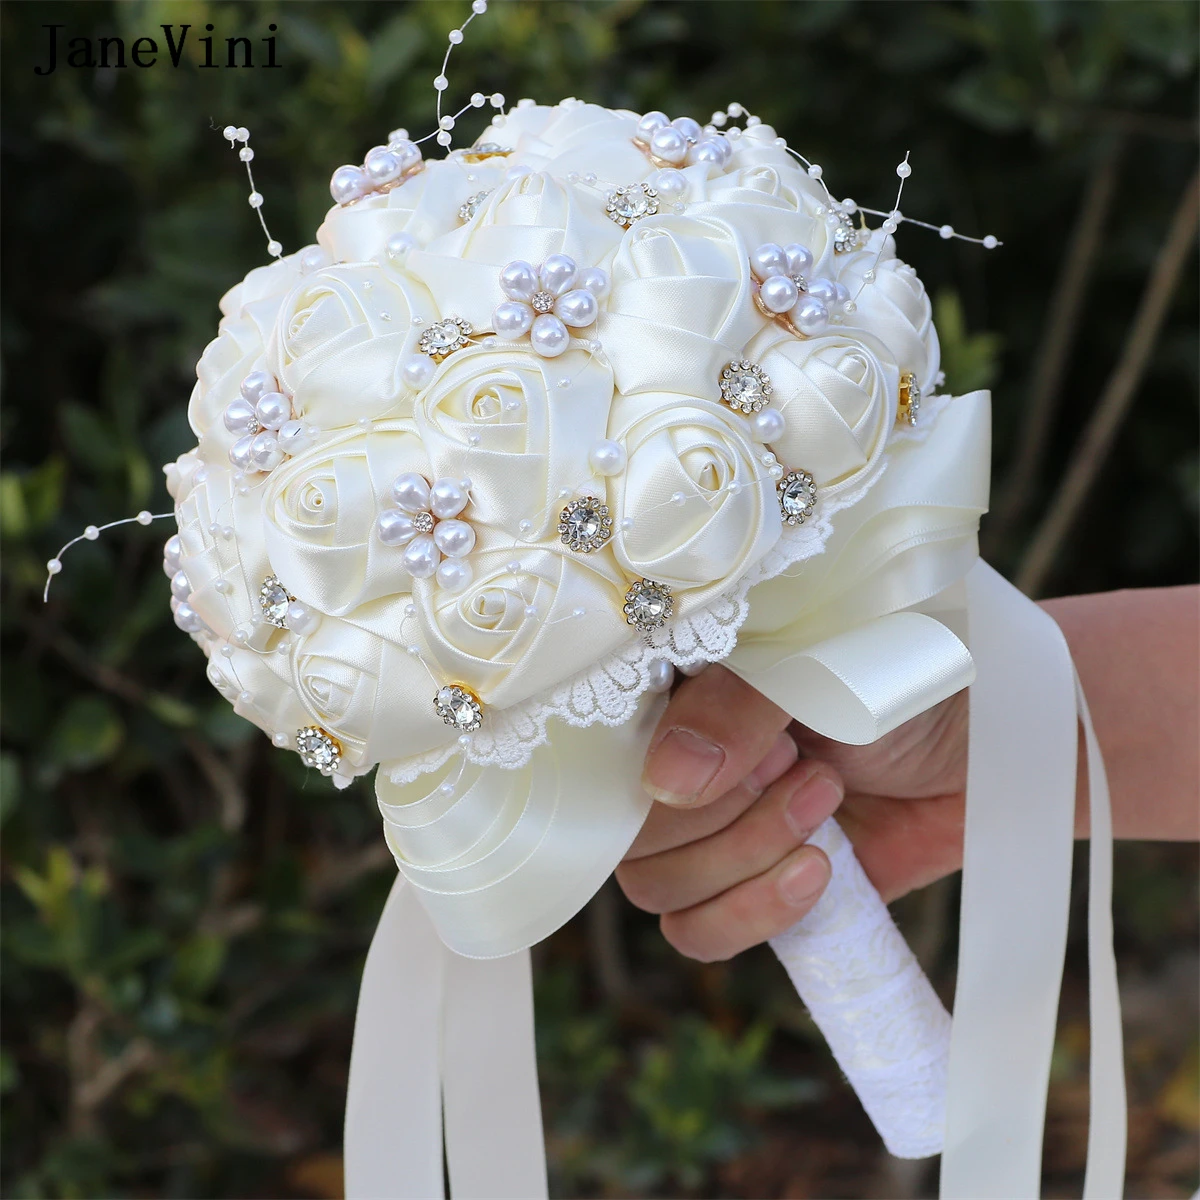 

JaneVini Elegant Ivory Bridal Brooch Bouquets Pearls Crystals Artificial Satin Roses Bridesmaid Bride Bouquet Flower for Wedding